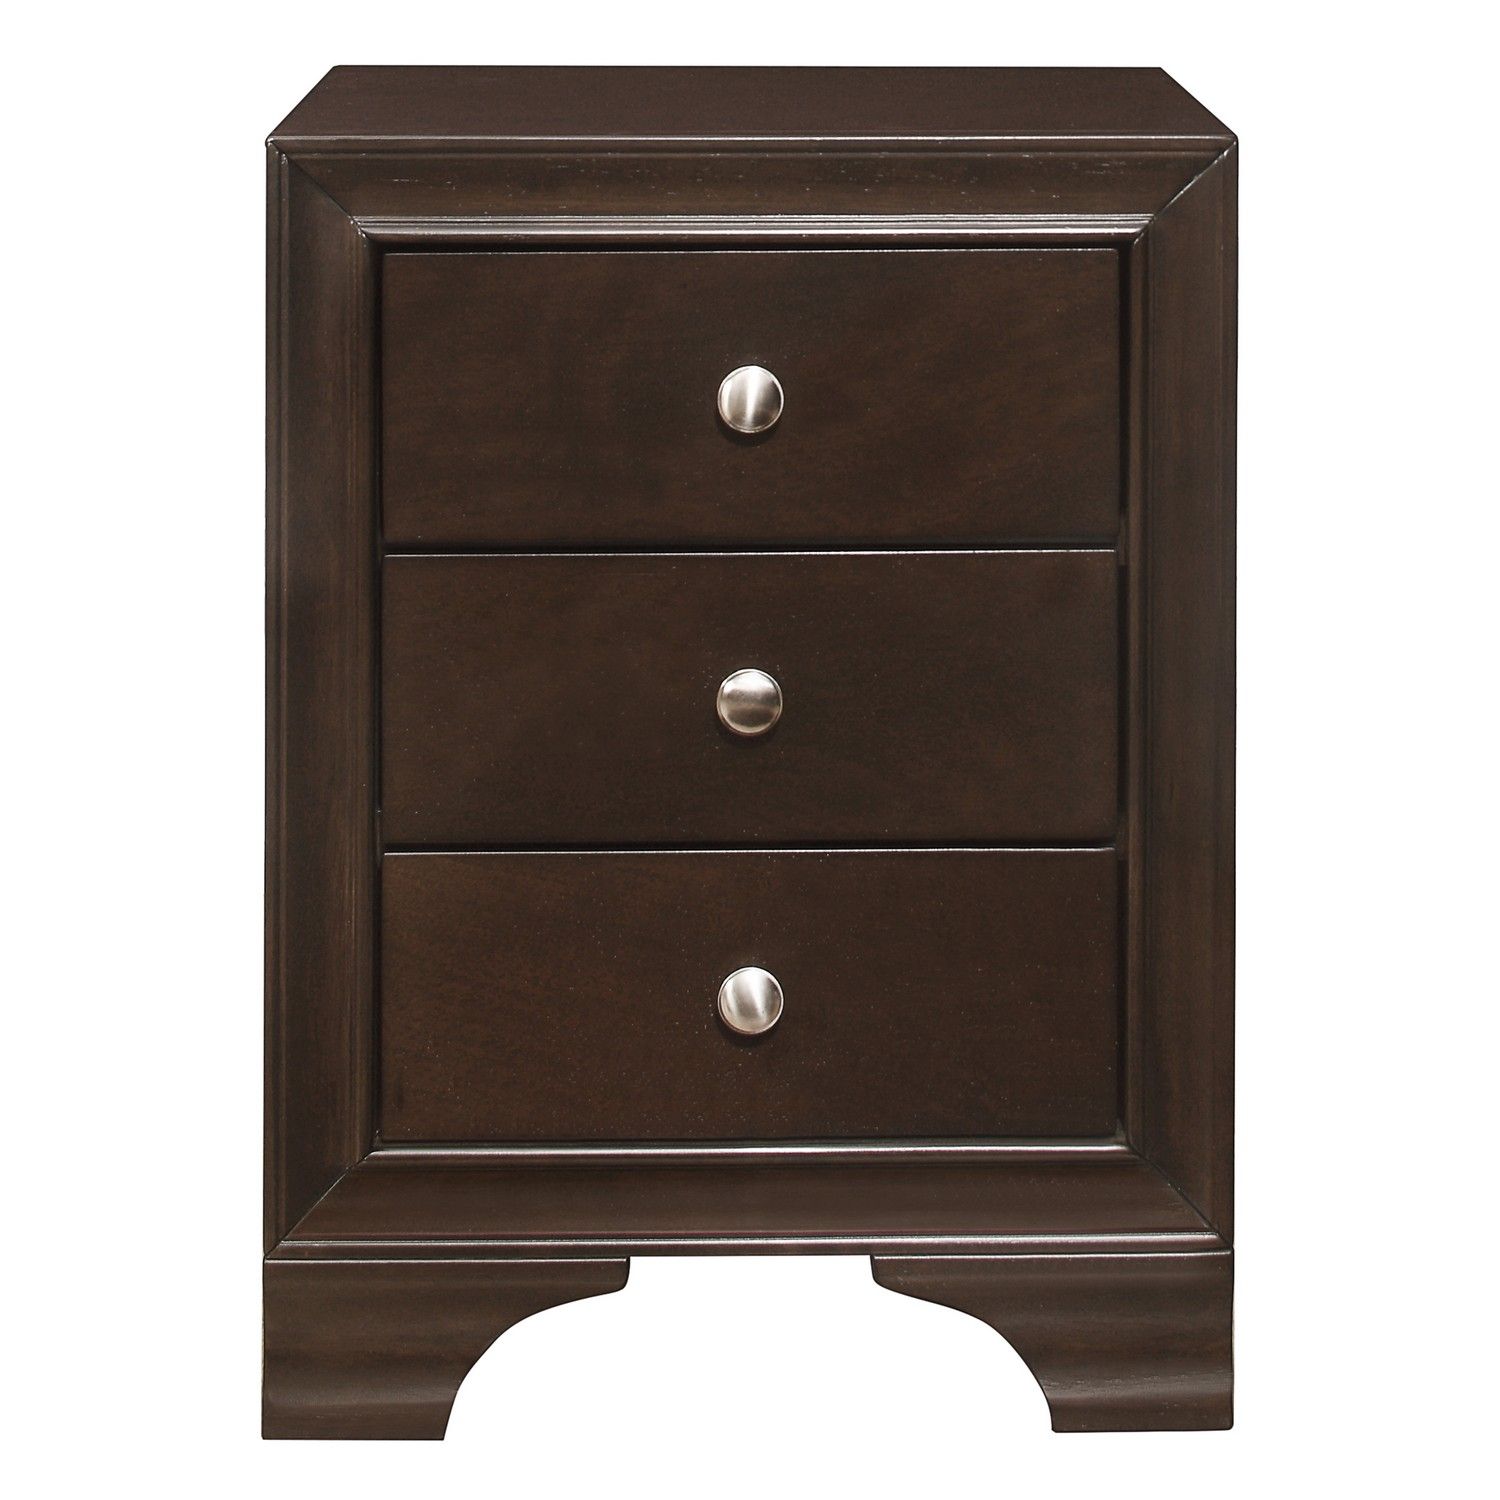 Homelegance Centralia Night Stand - Brown